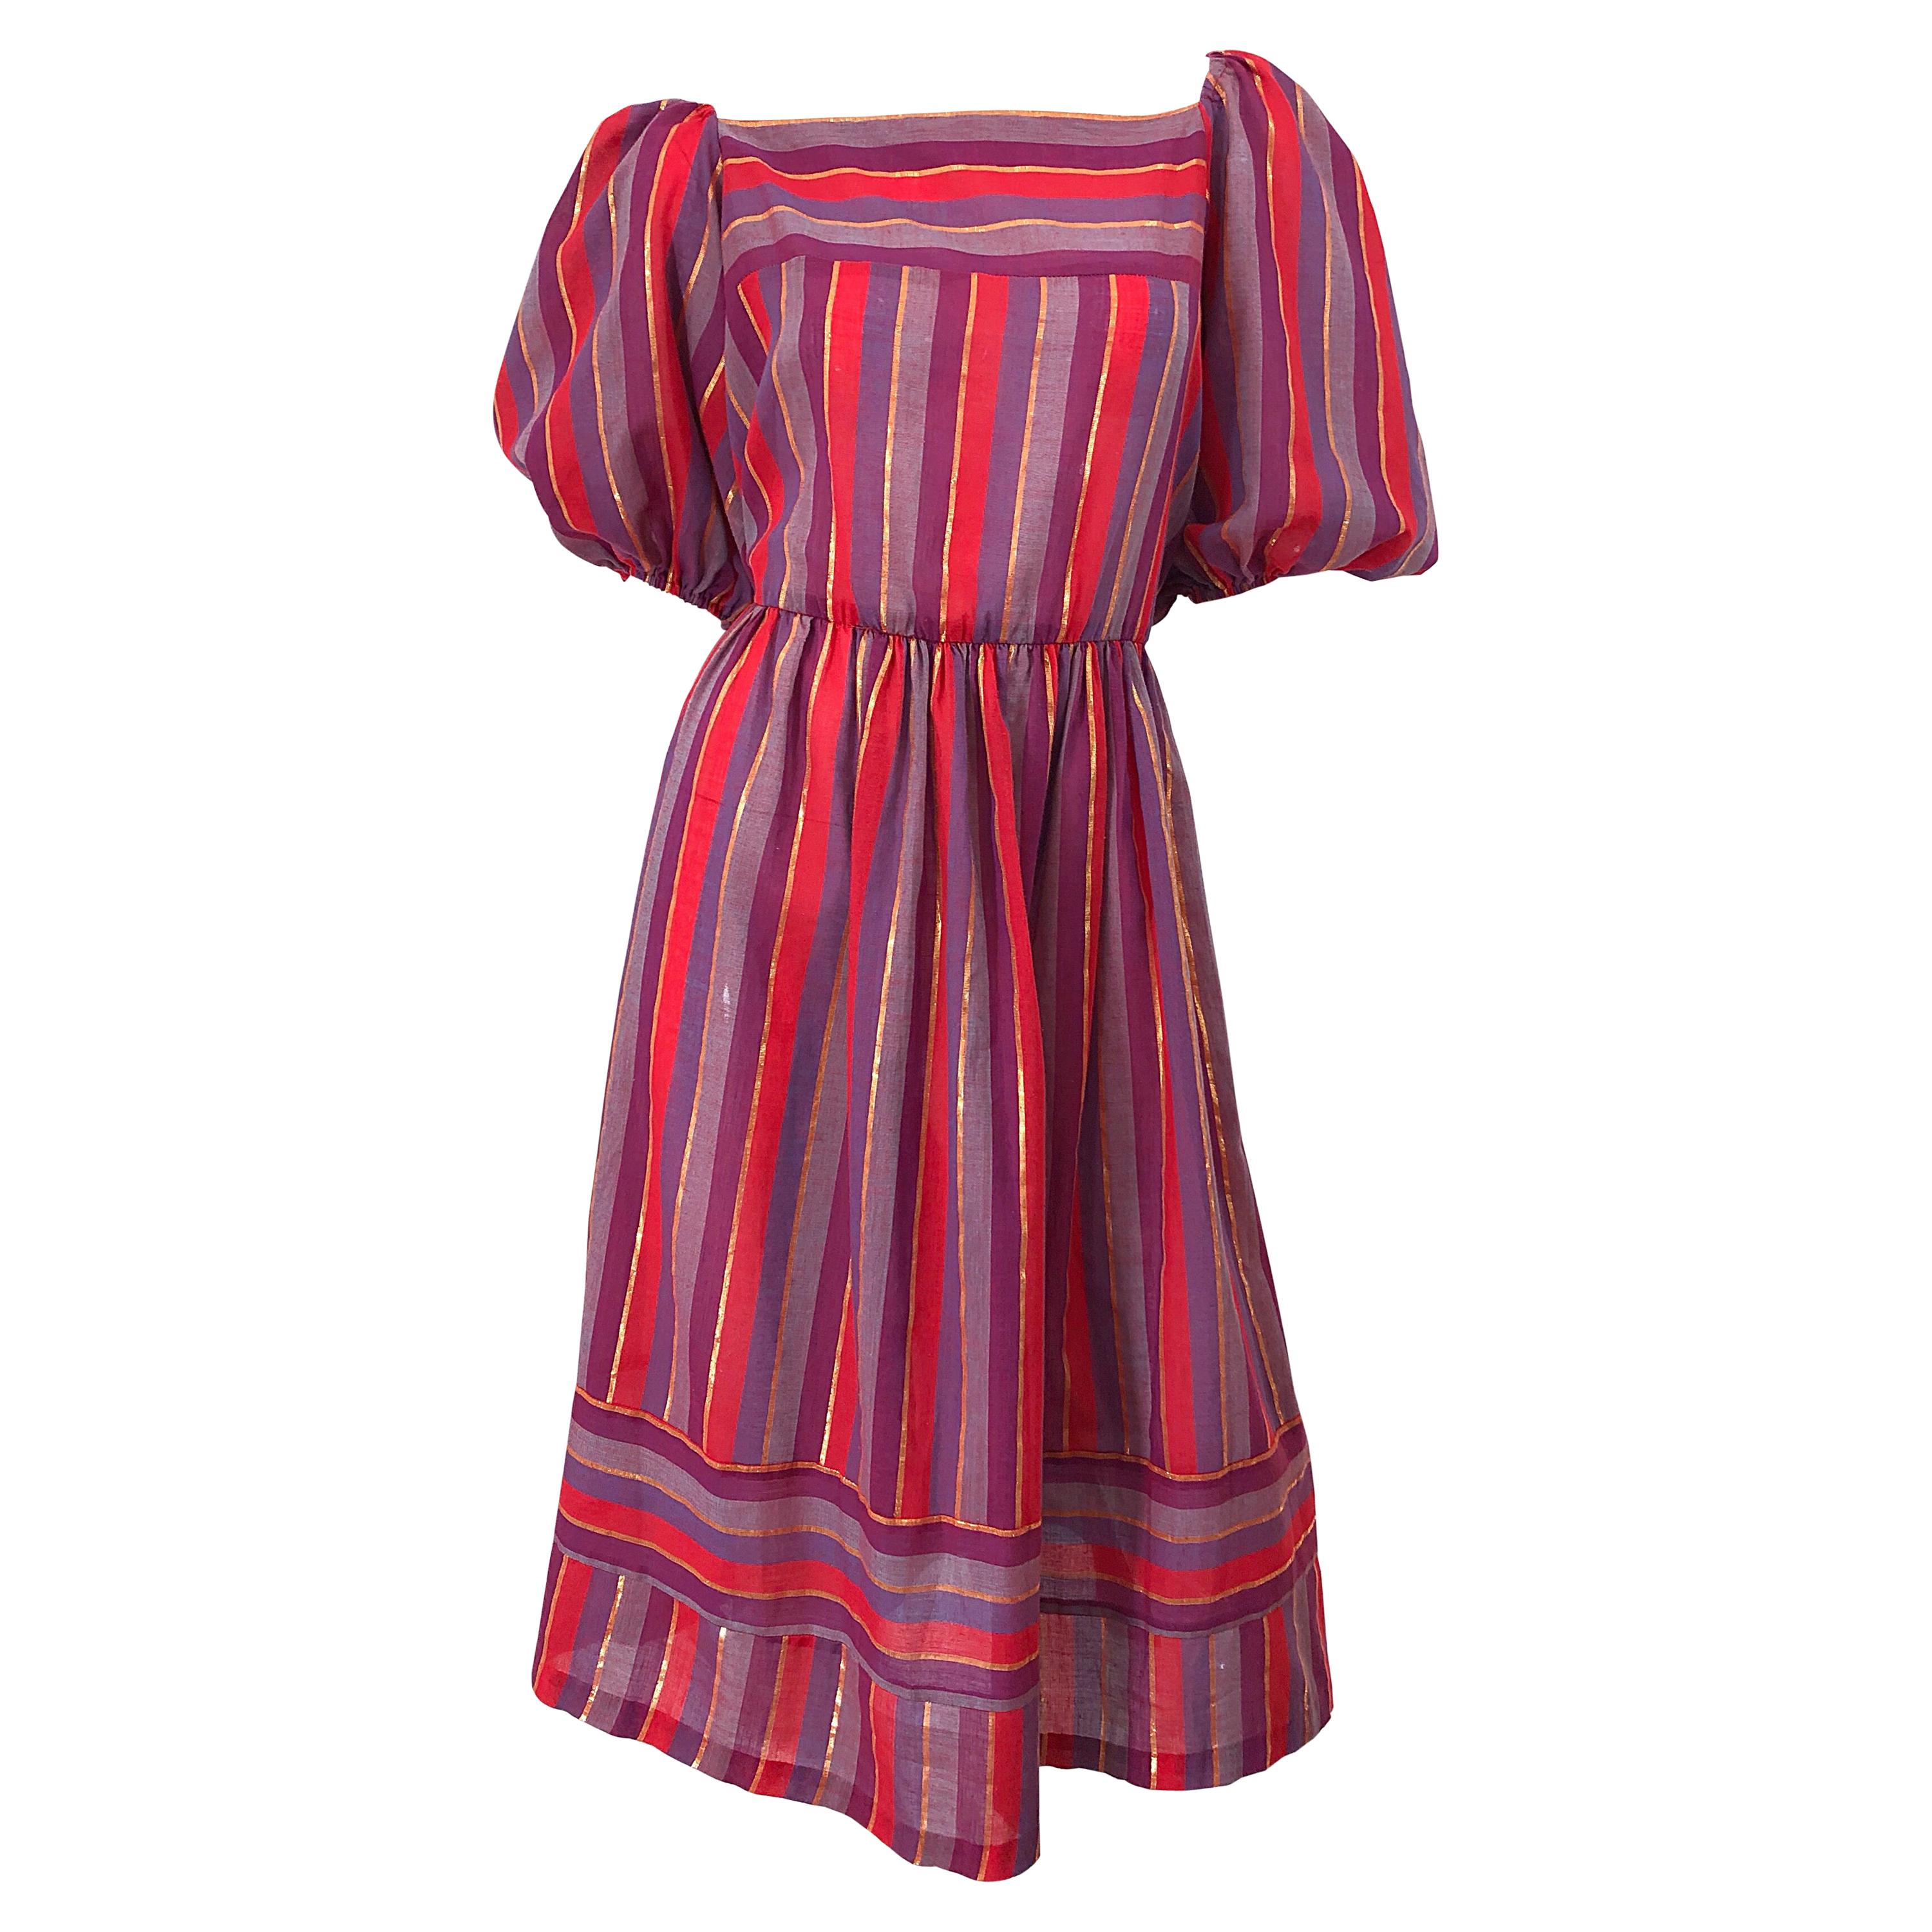 1970s Boho Chic Red + Purple + Gold Striped Cotton Voile 70s Vintage Dress